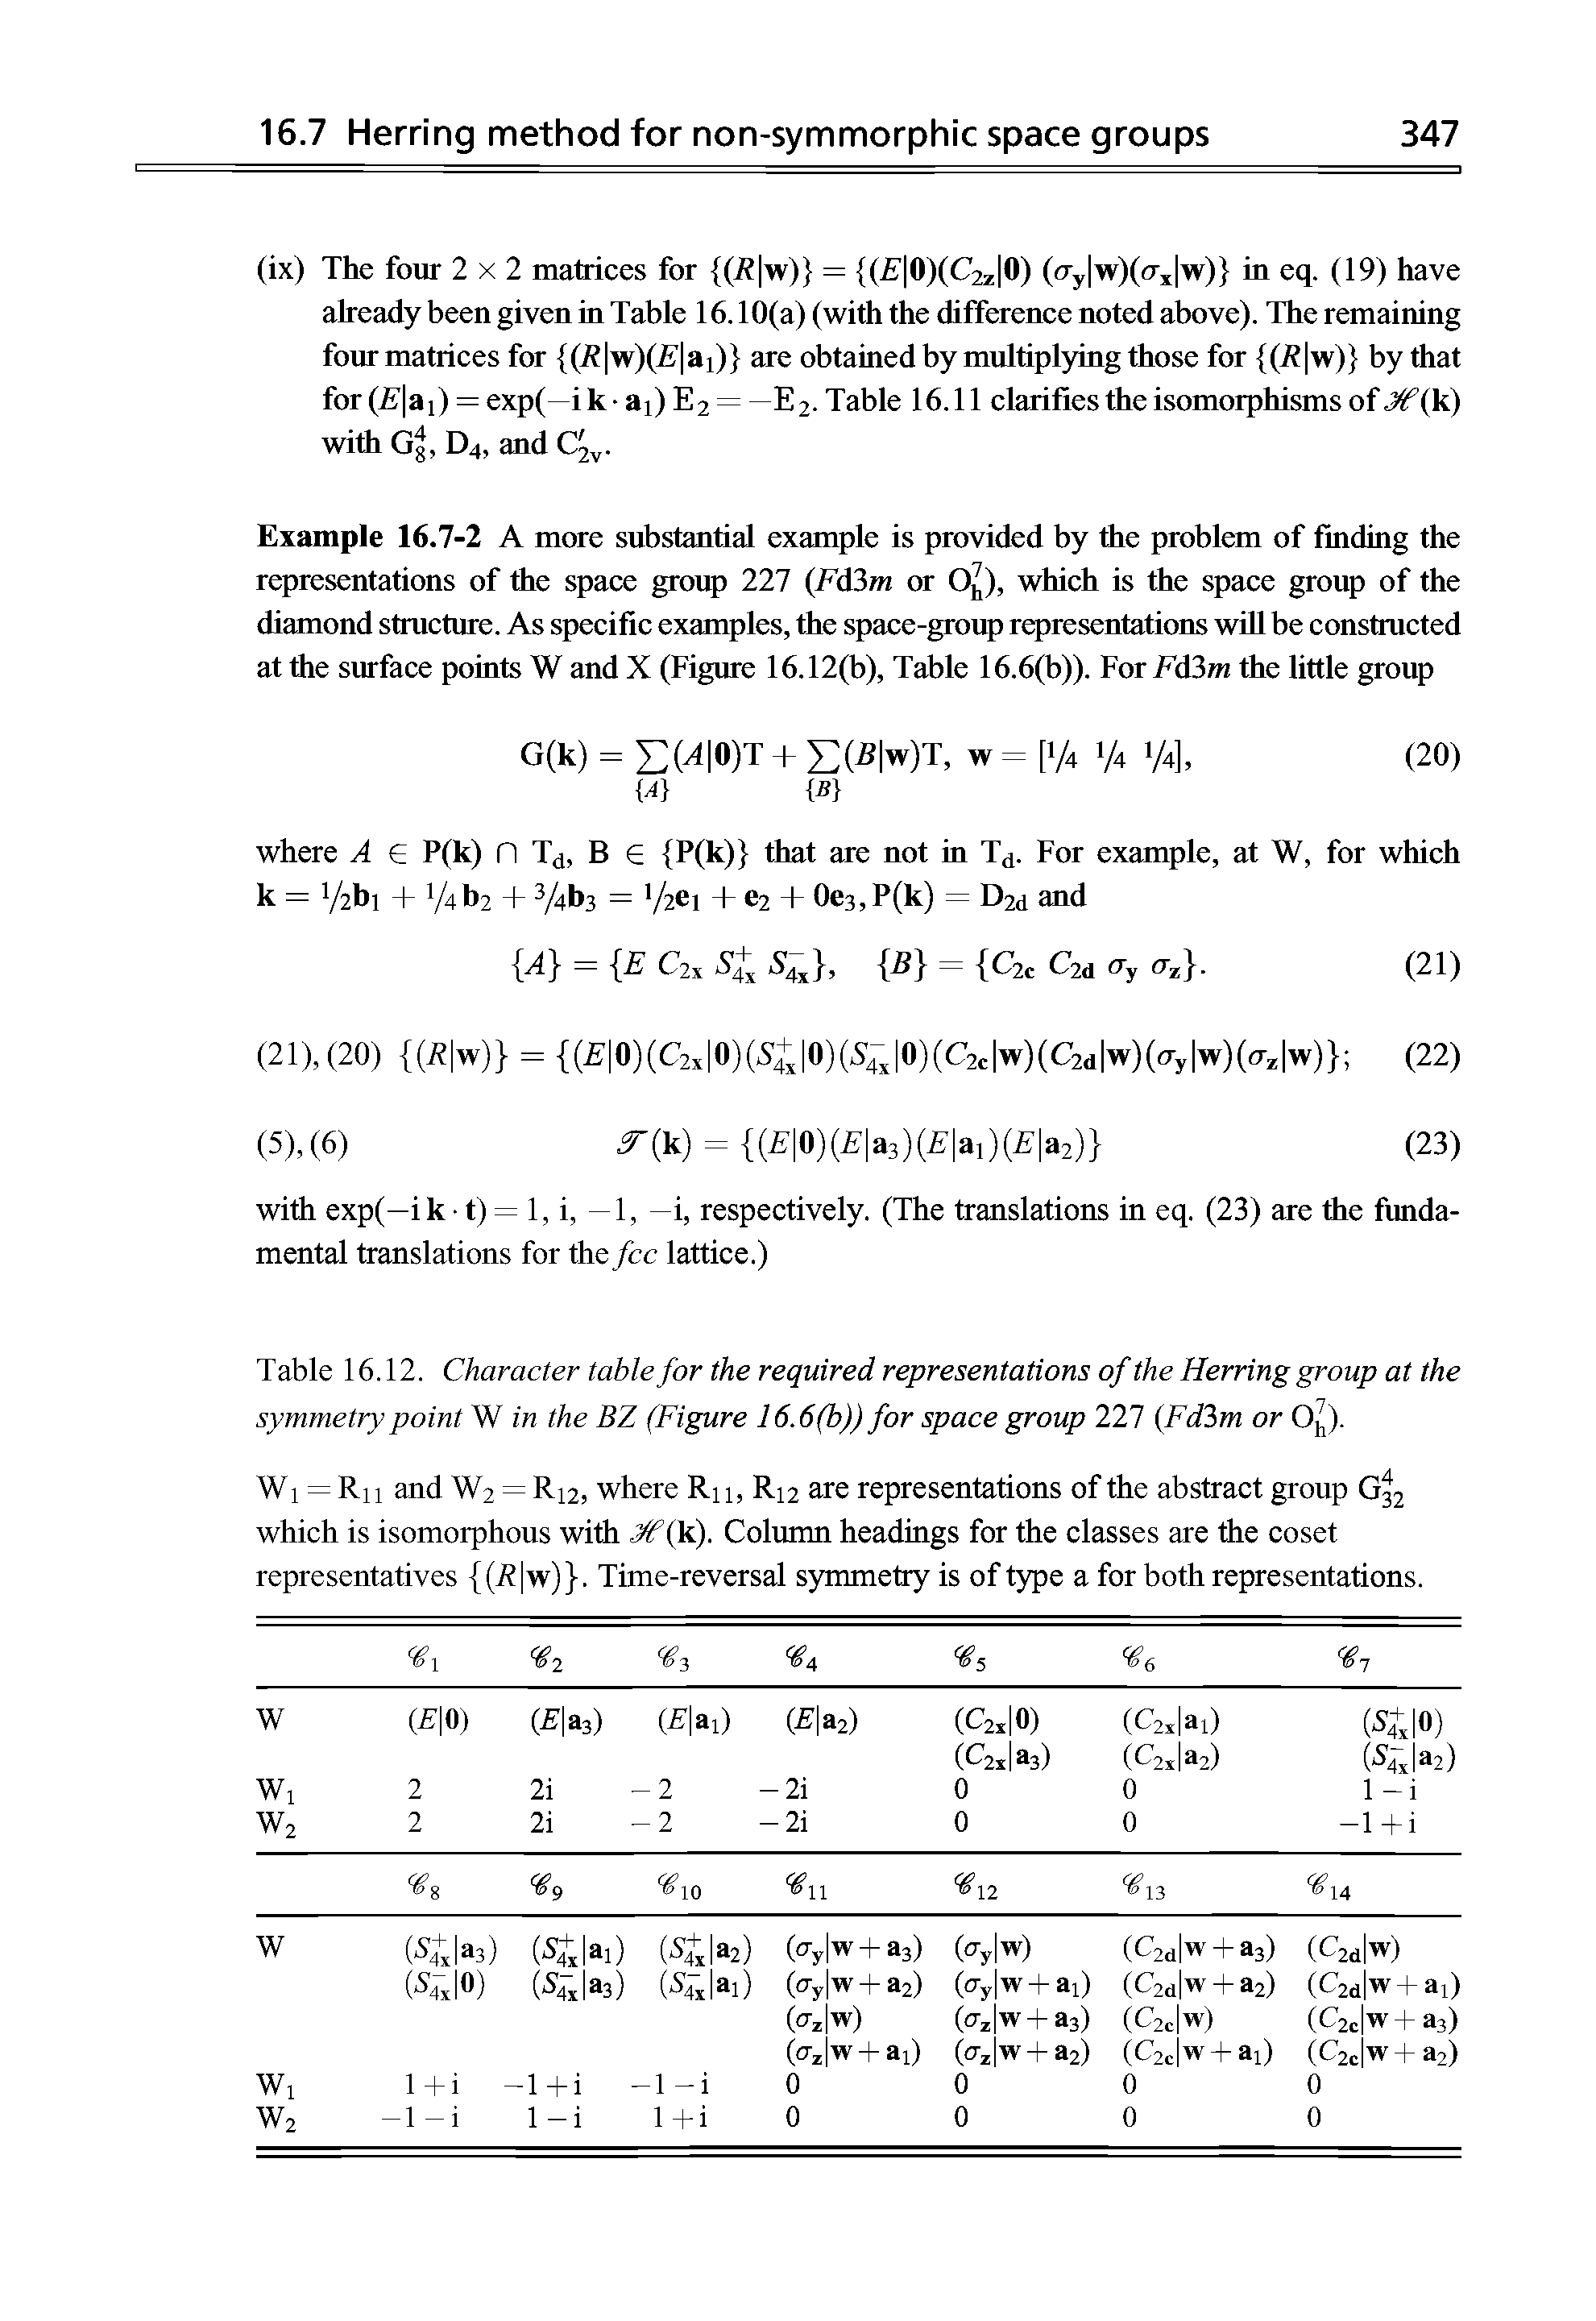 Table 16.12. Character table for the required representations of the Herring group at the symmetry point W in the BZ (Figure 16.6(b)) for space group 227 (Fd3m or O ).